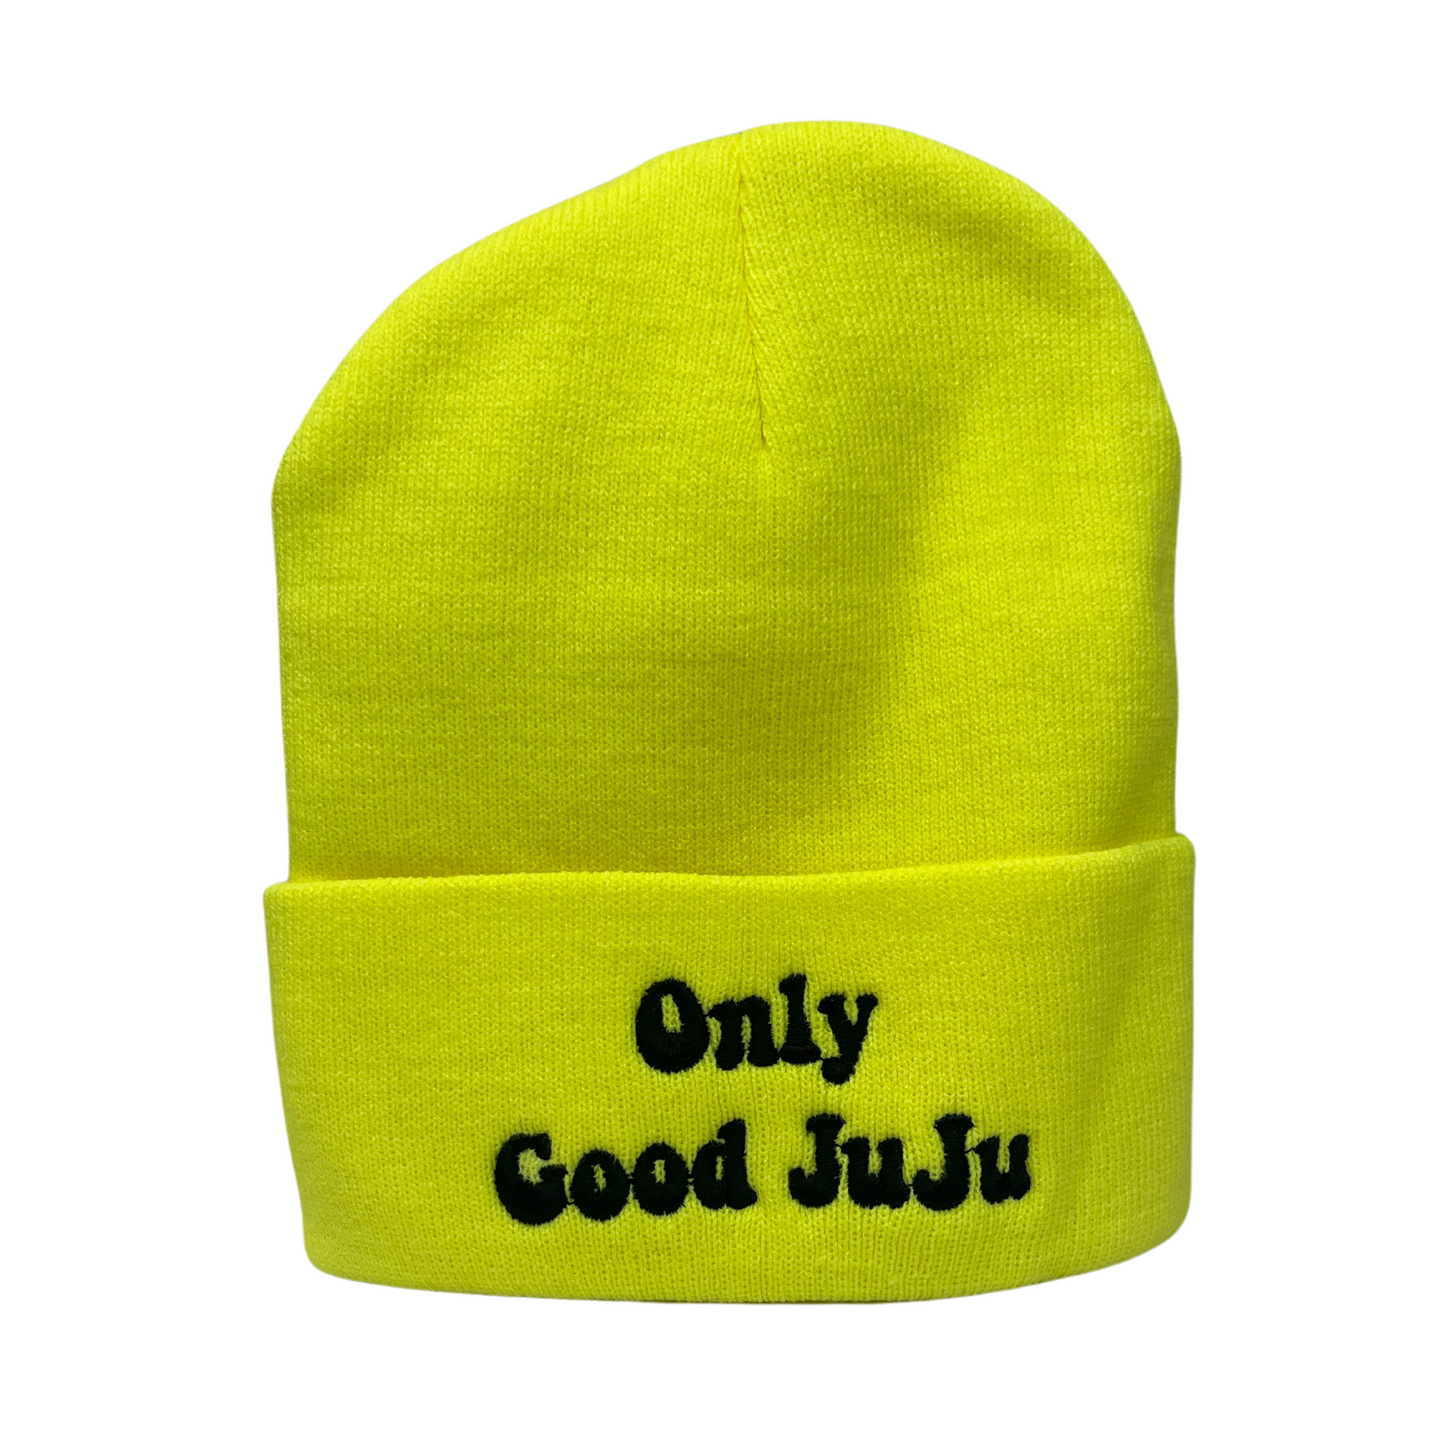 Only Good JuJu Beanie- Bubble Embroider font